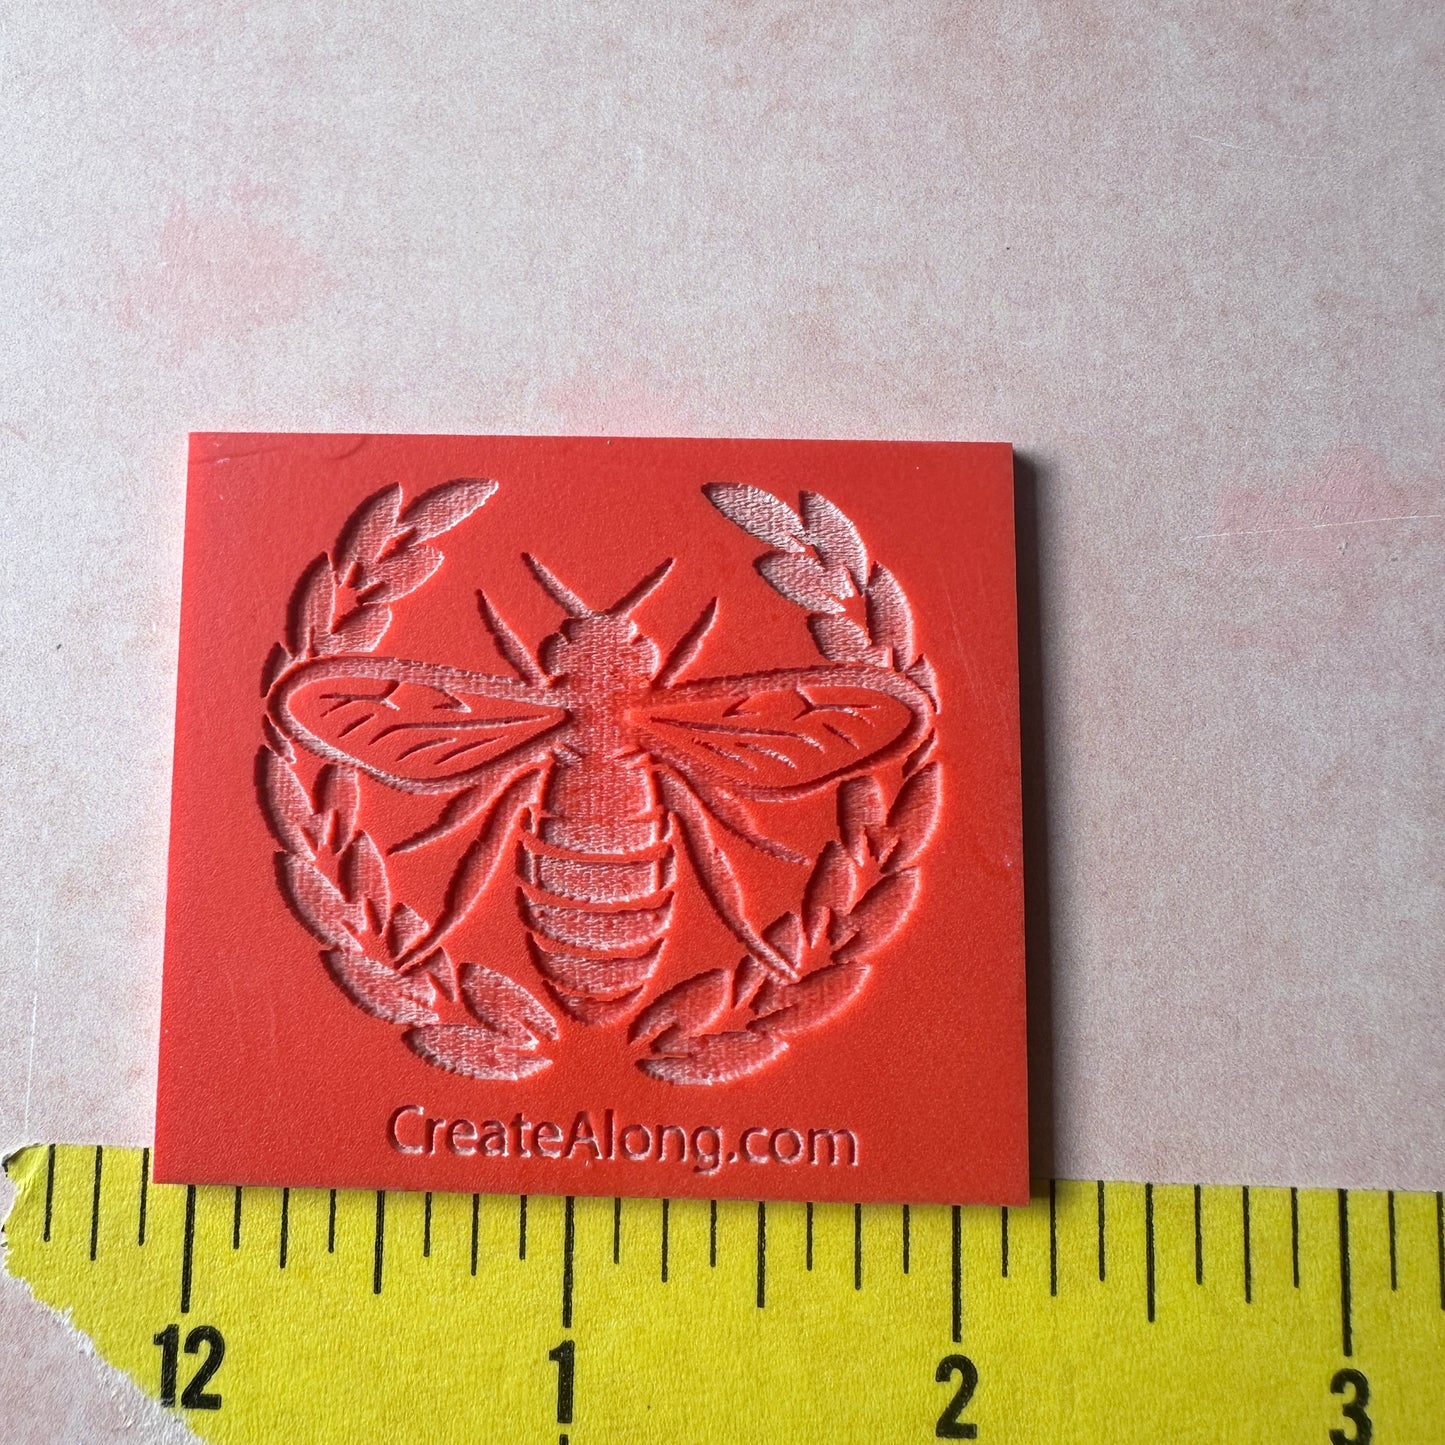 Queen Bee rubber stamp deco element small stamps for polymer clay and crafts